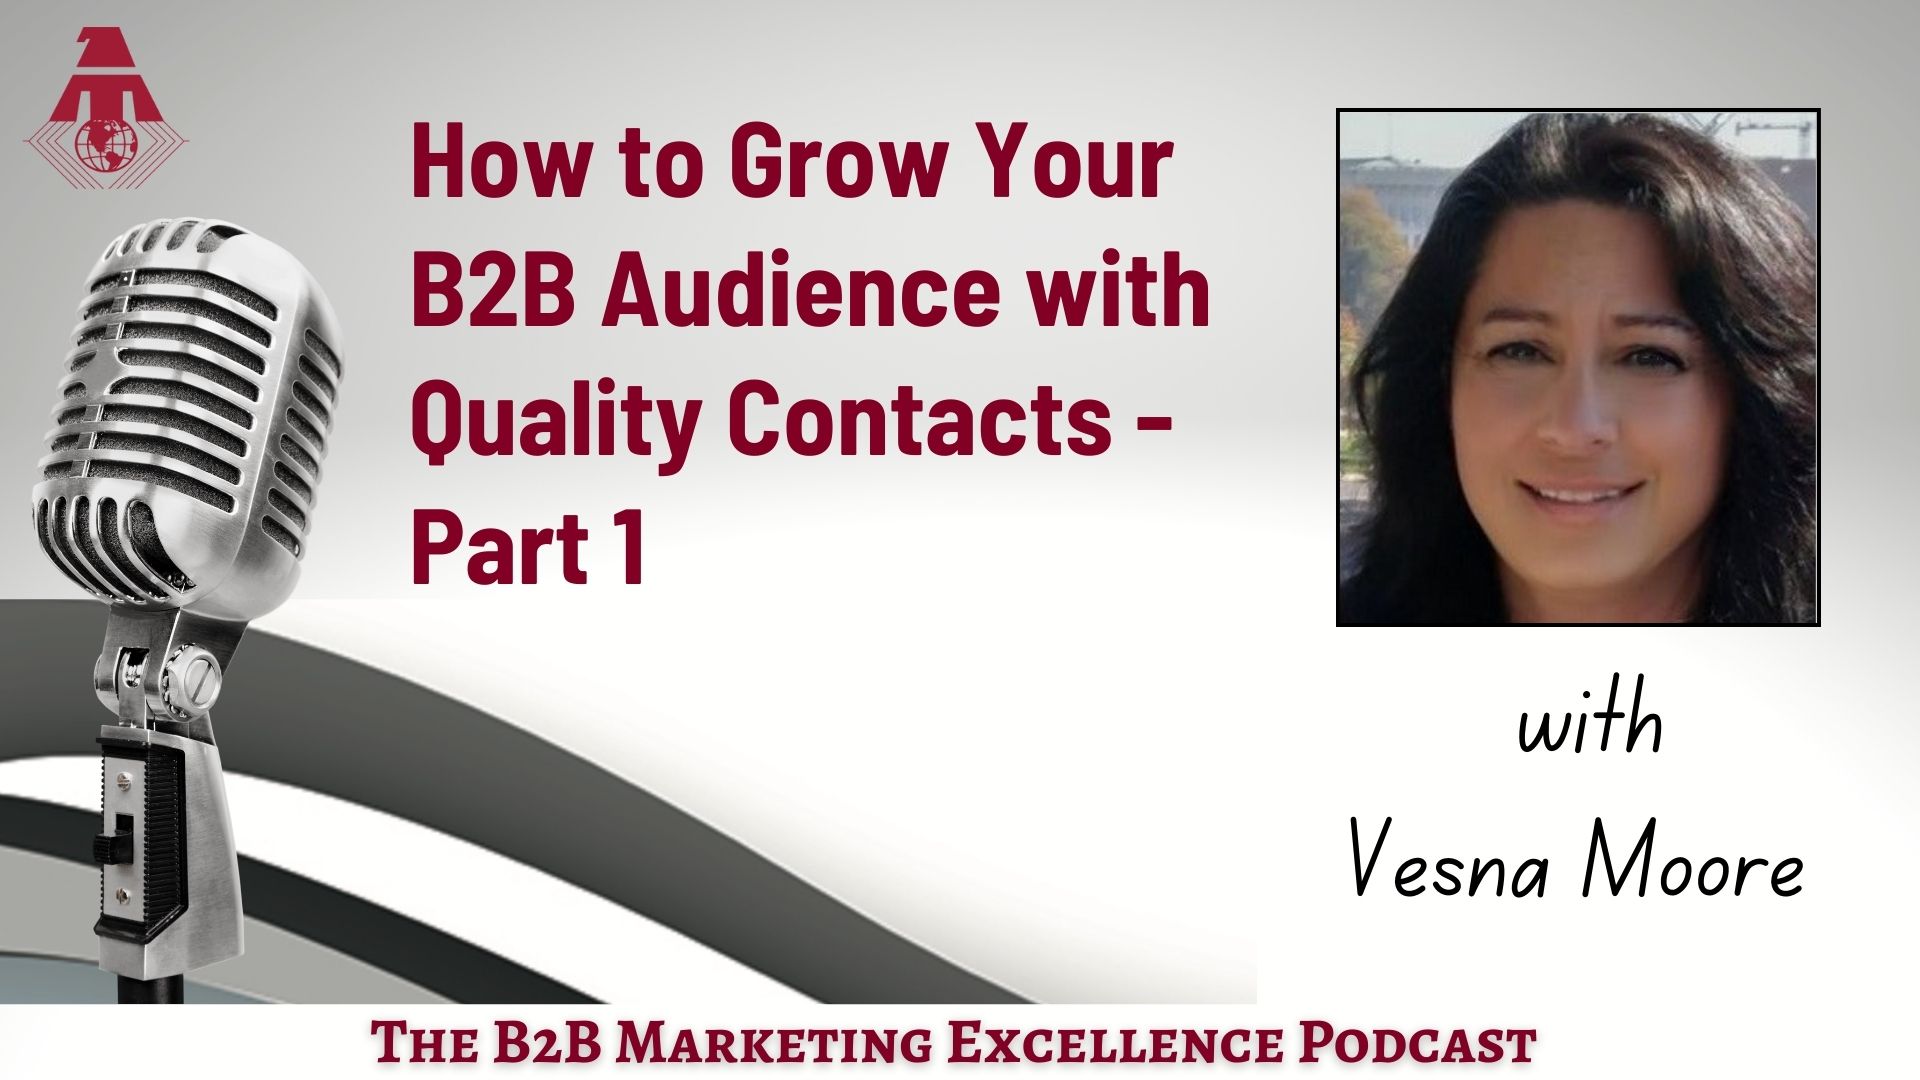 Podcast – How to Grow Your B2B Audience with Quality Contacts